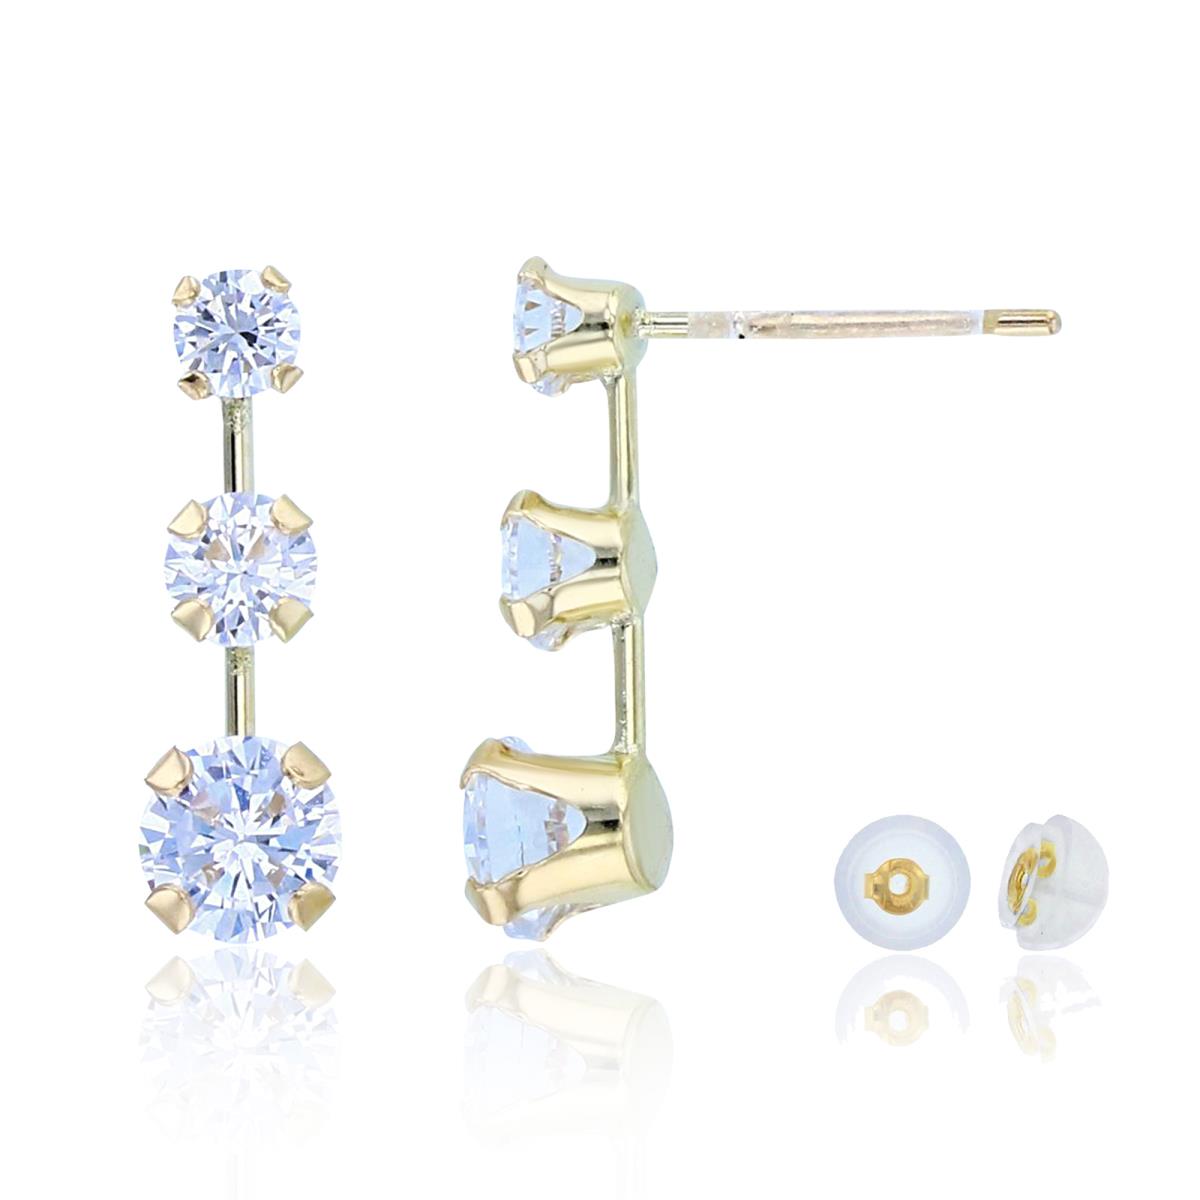 10K Yellow Gold Graduated 3-Rnd CZ Vertical Earrings with Silicon Backs